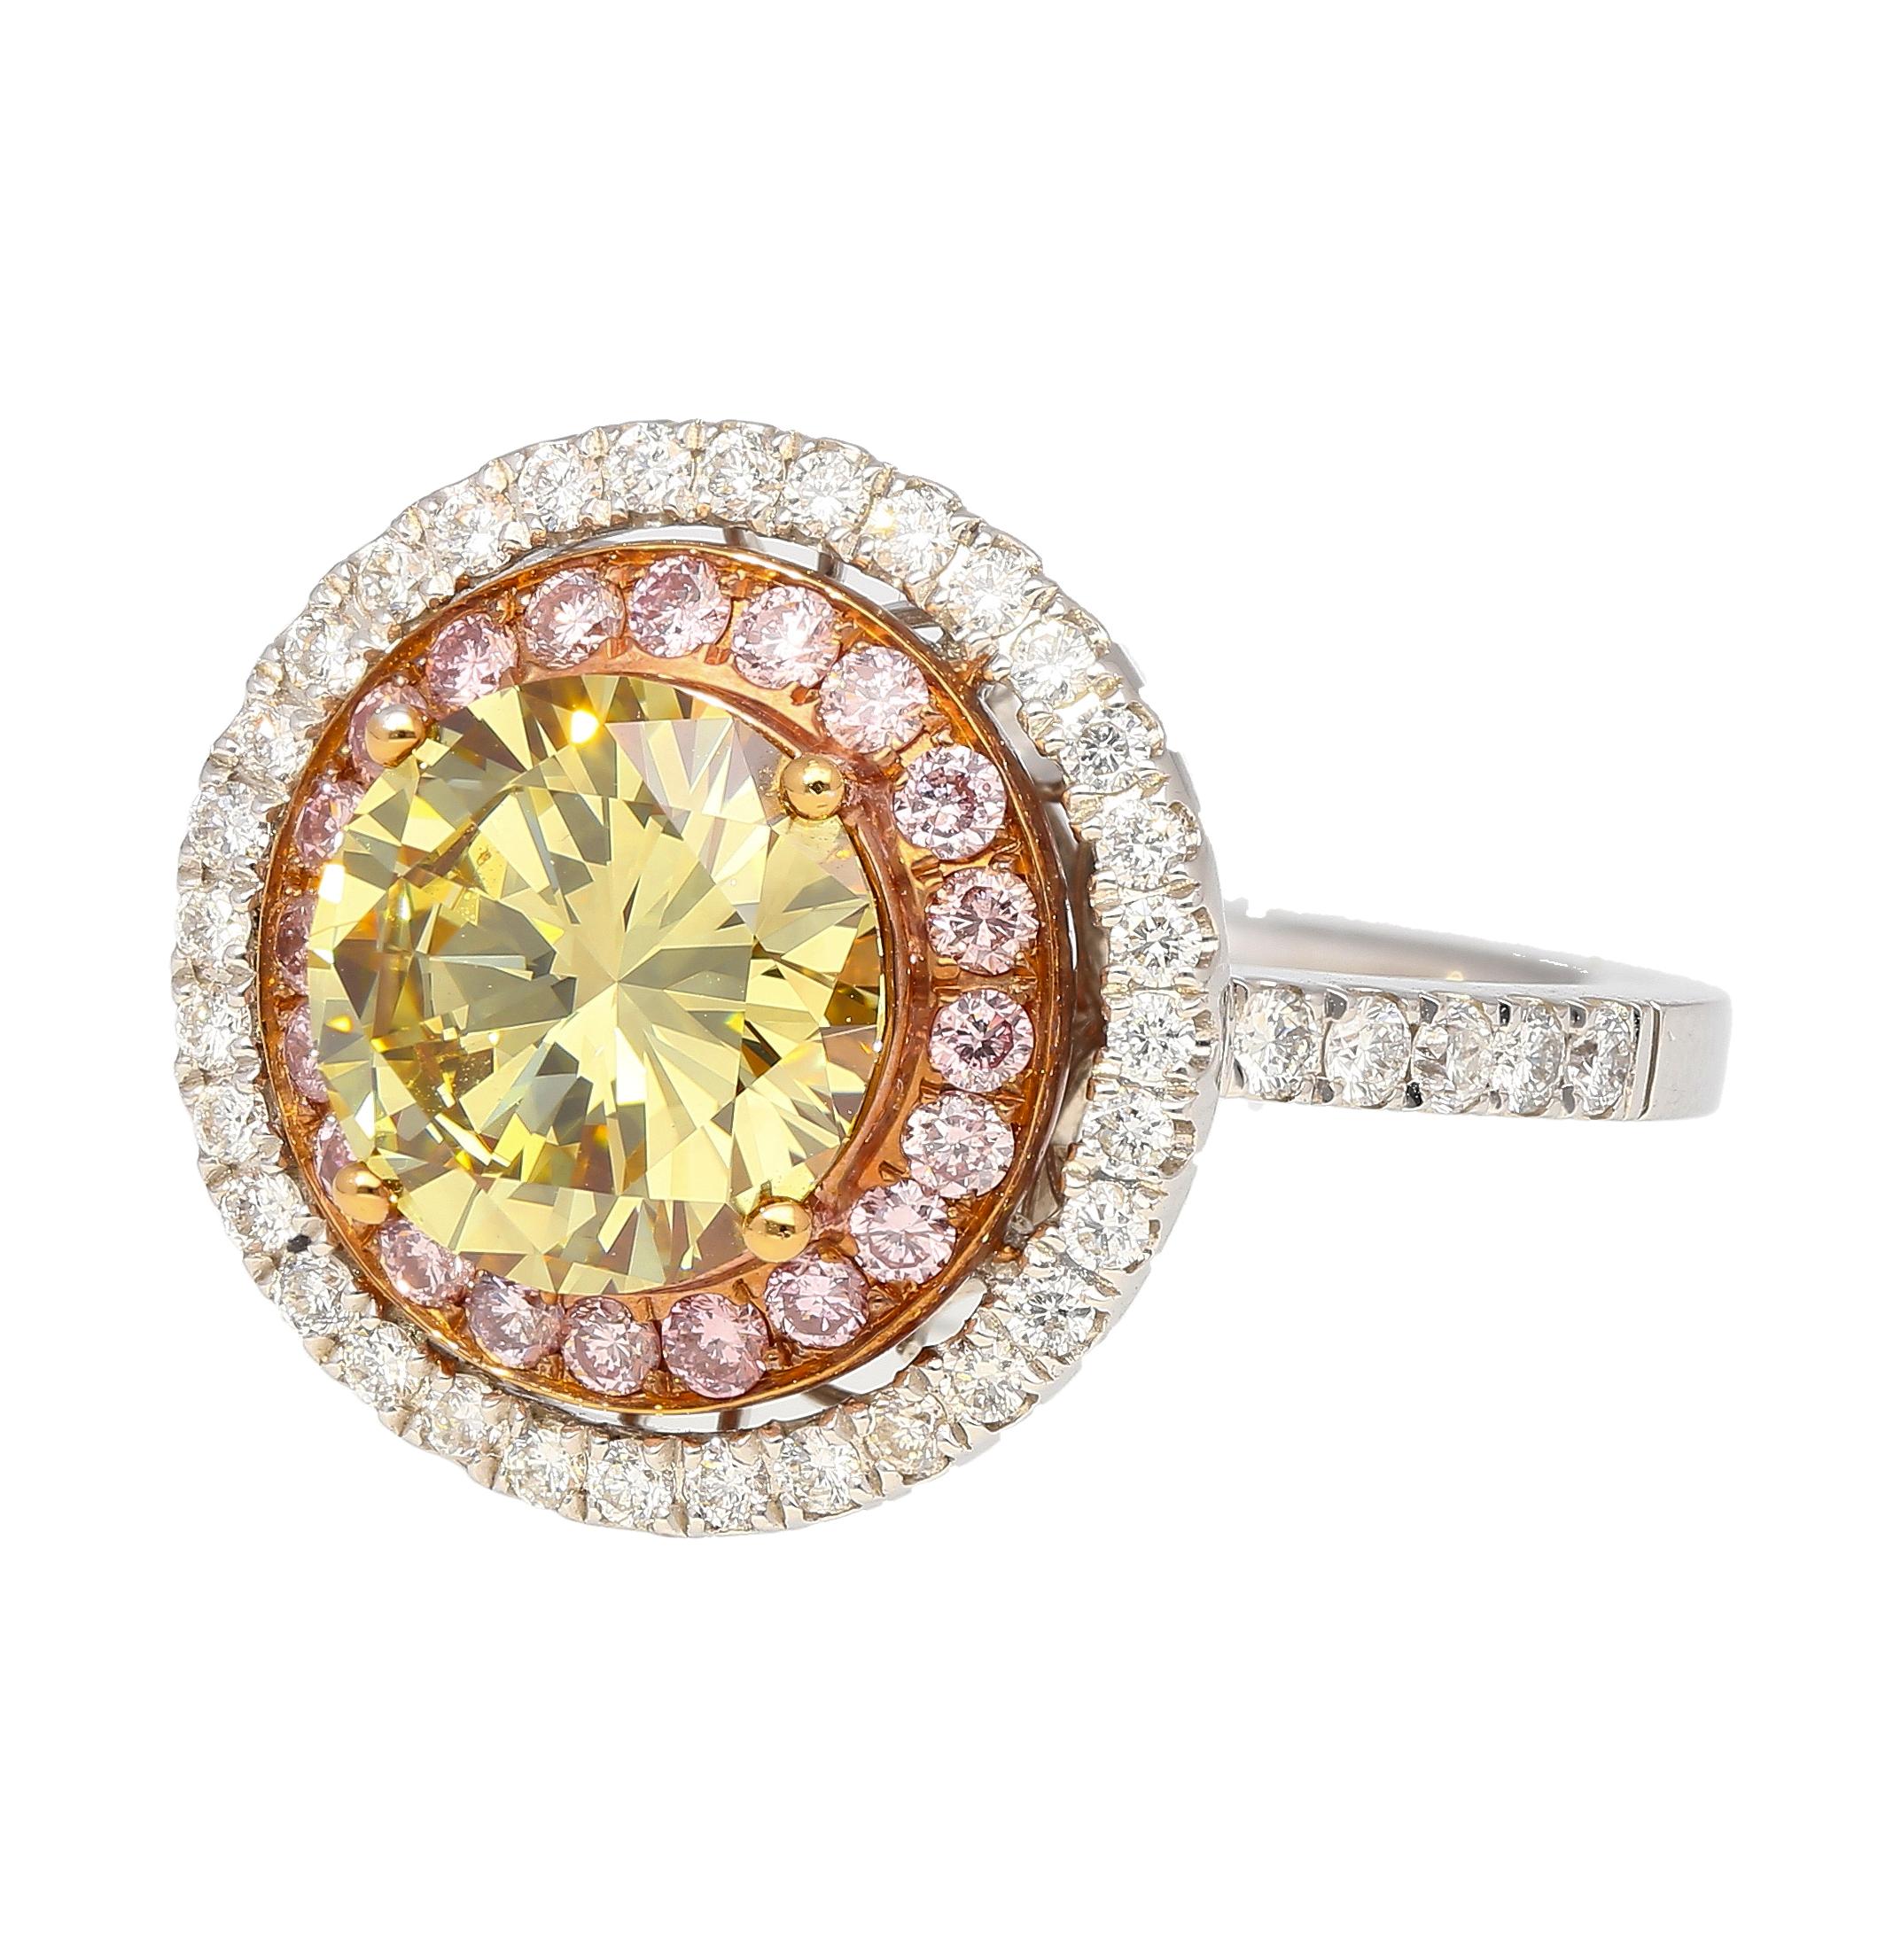 2.30 carat fancy color natural diamond, with a multi-colored double diamond halo and set in 18k solid gold. GIA Certified 2.30 carat Fancy Brownish Greenish Yellow, even color distribution, natural color origin, and VS1 clarity. GIA gave this grade